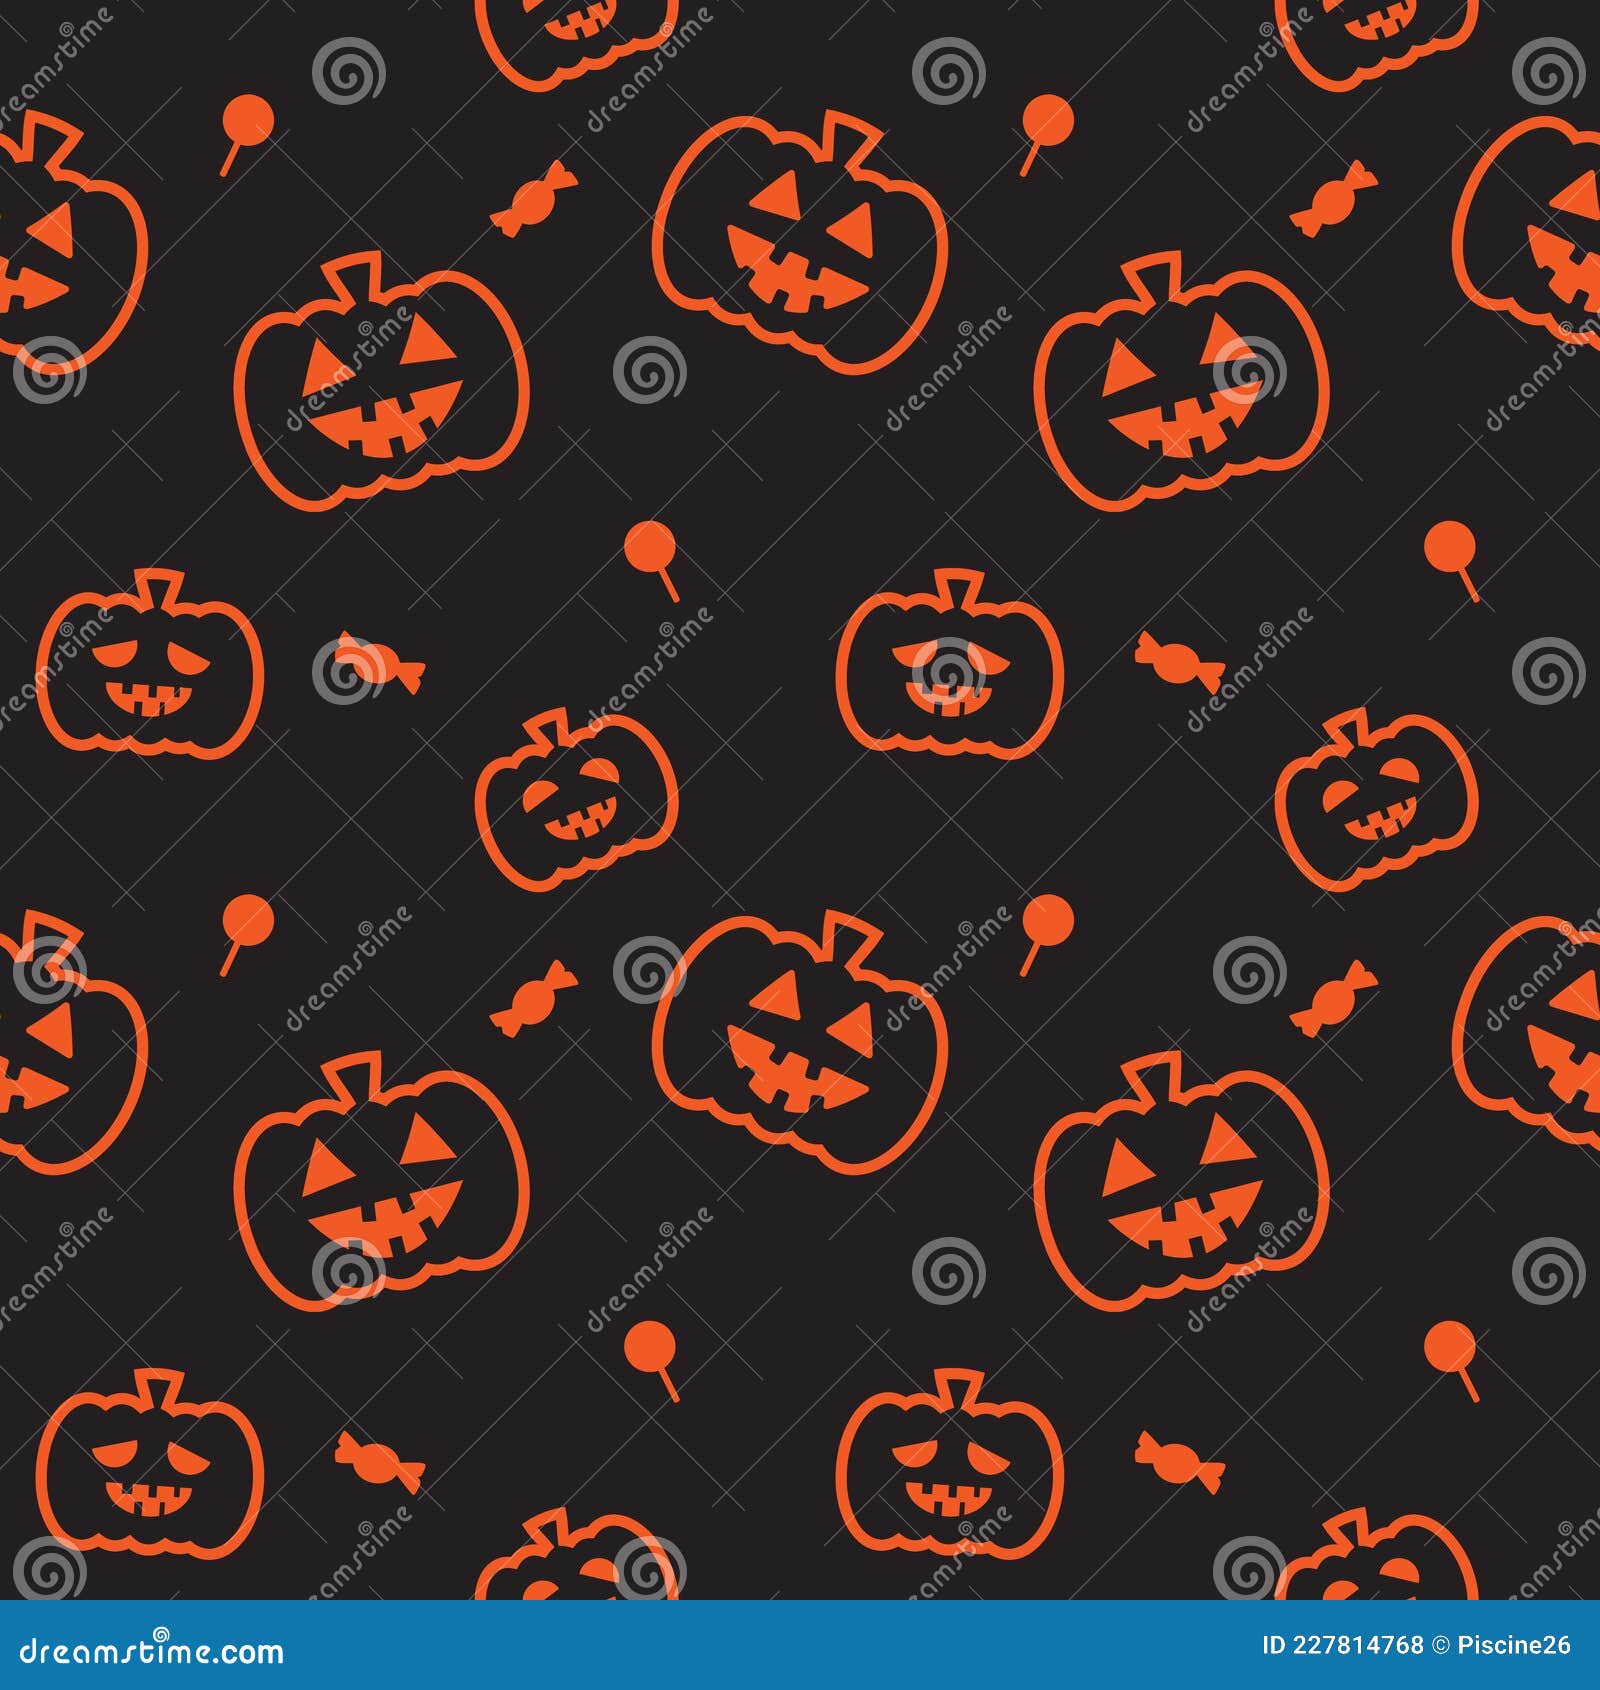 Cute Halloween Pattern with Candy and Sweets Fabric Seamless Cute ...